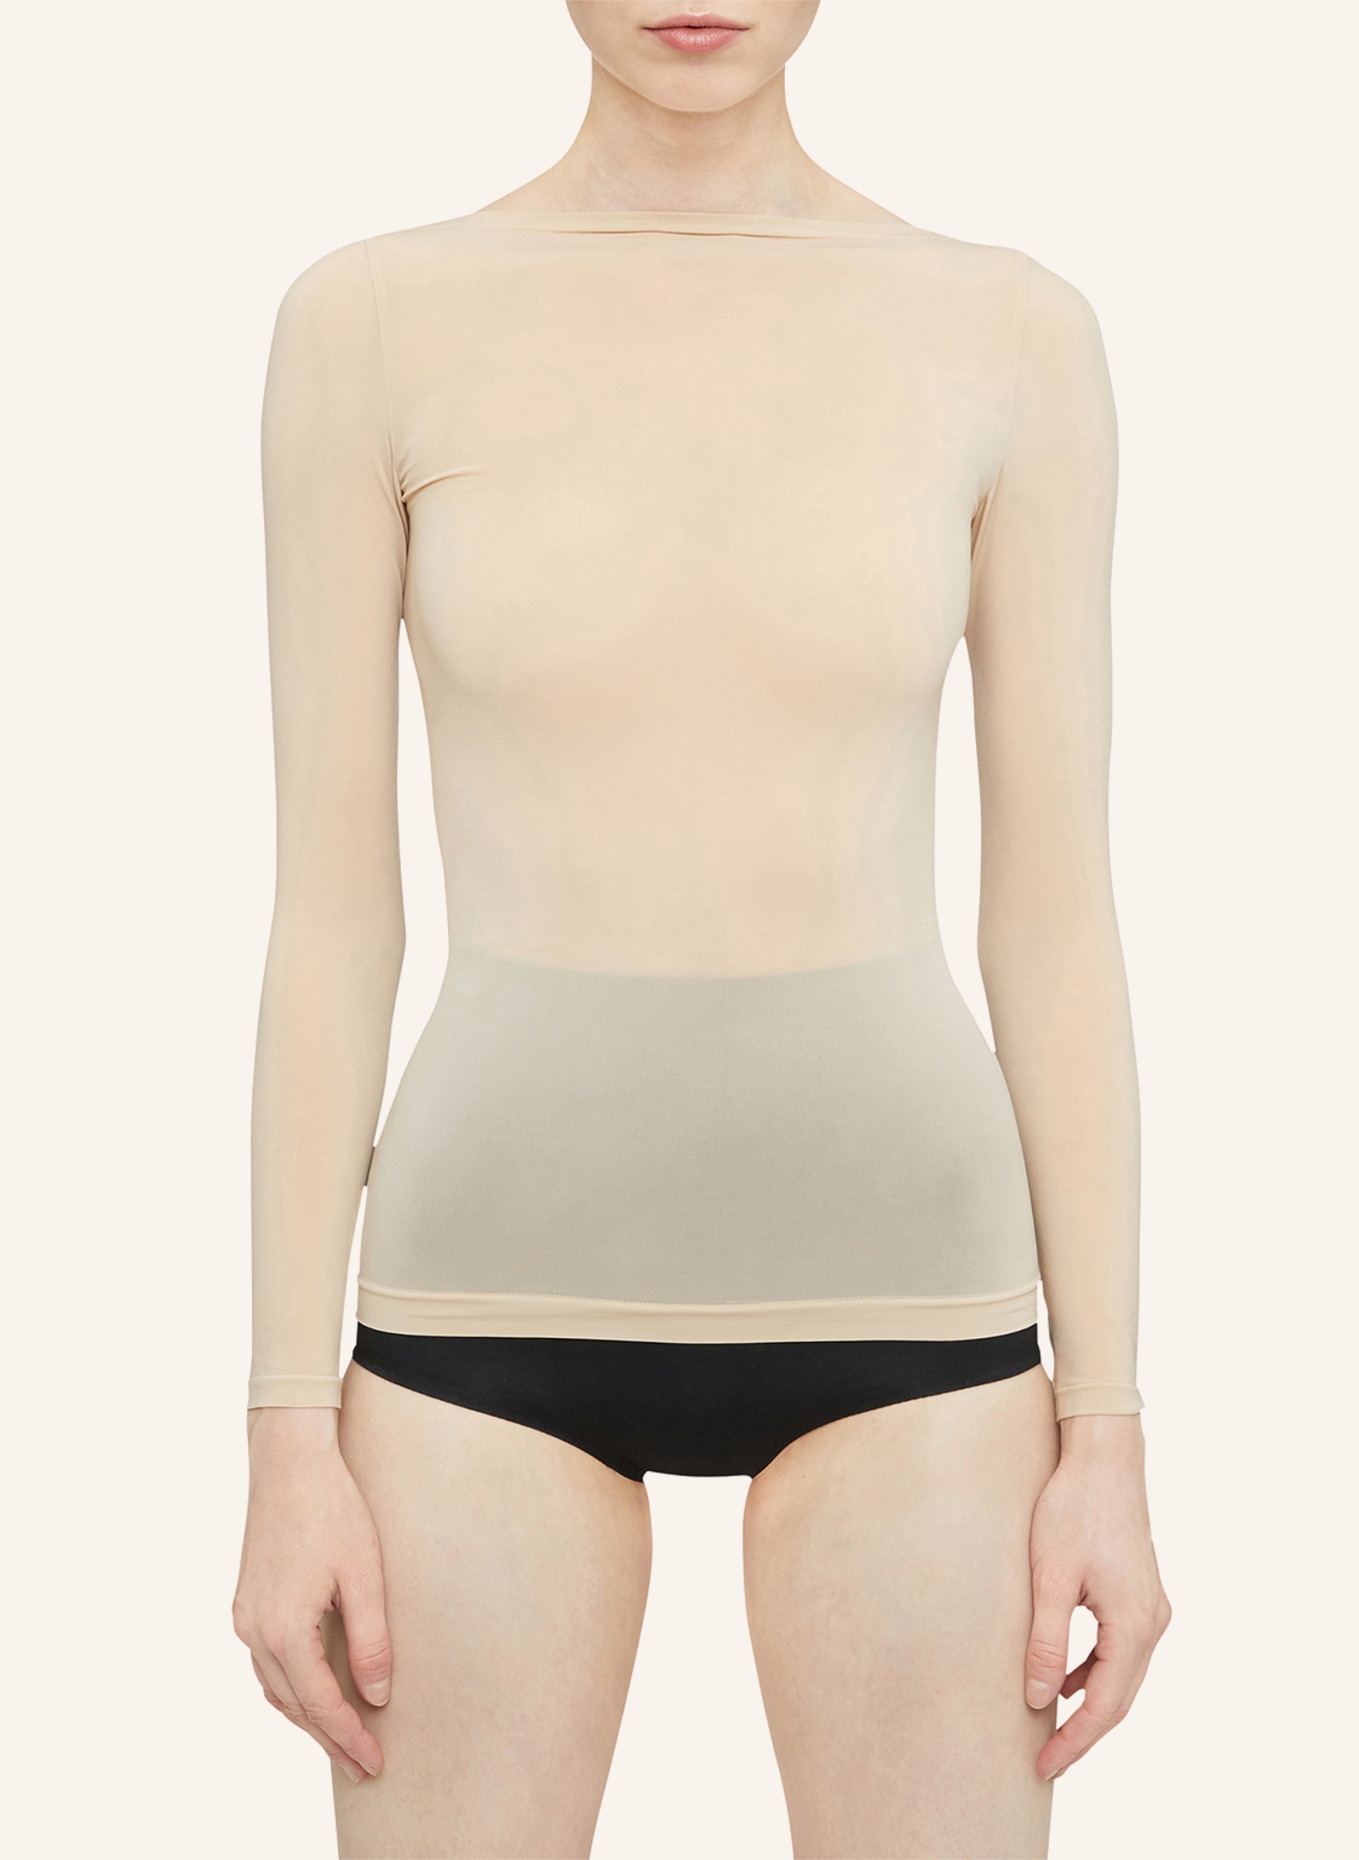 Wolford Top BUENOS AIRES, Farbe: BEIGE (Bild 3)